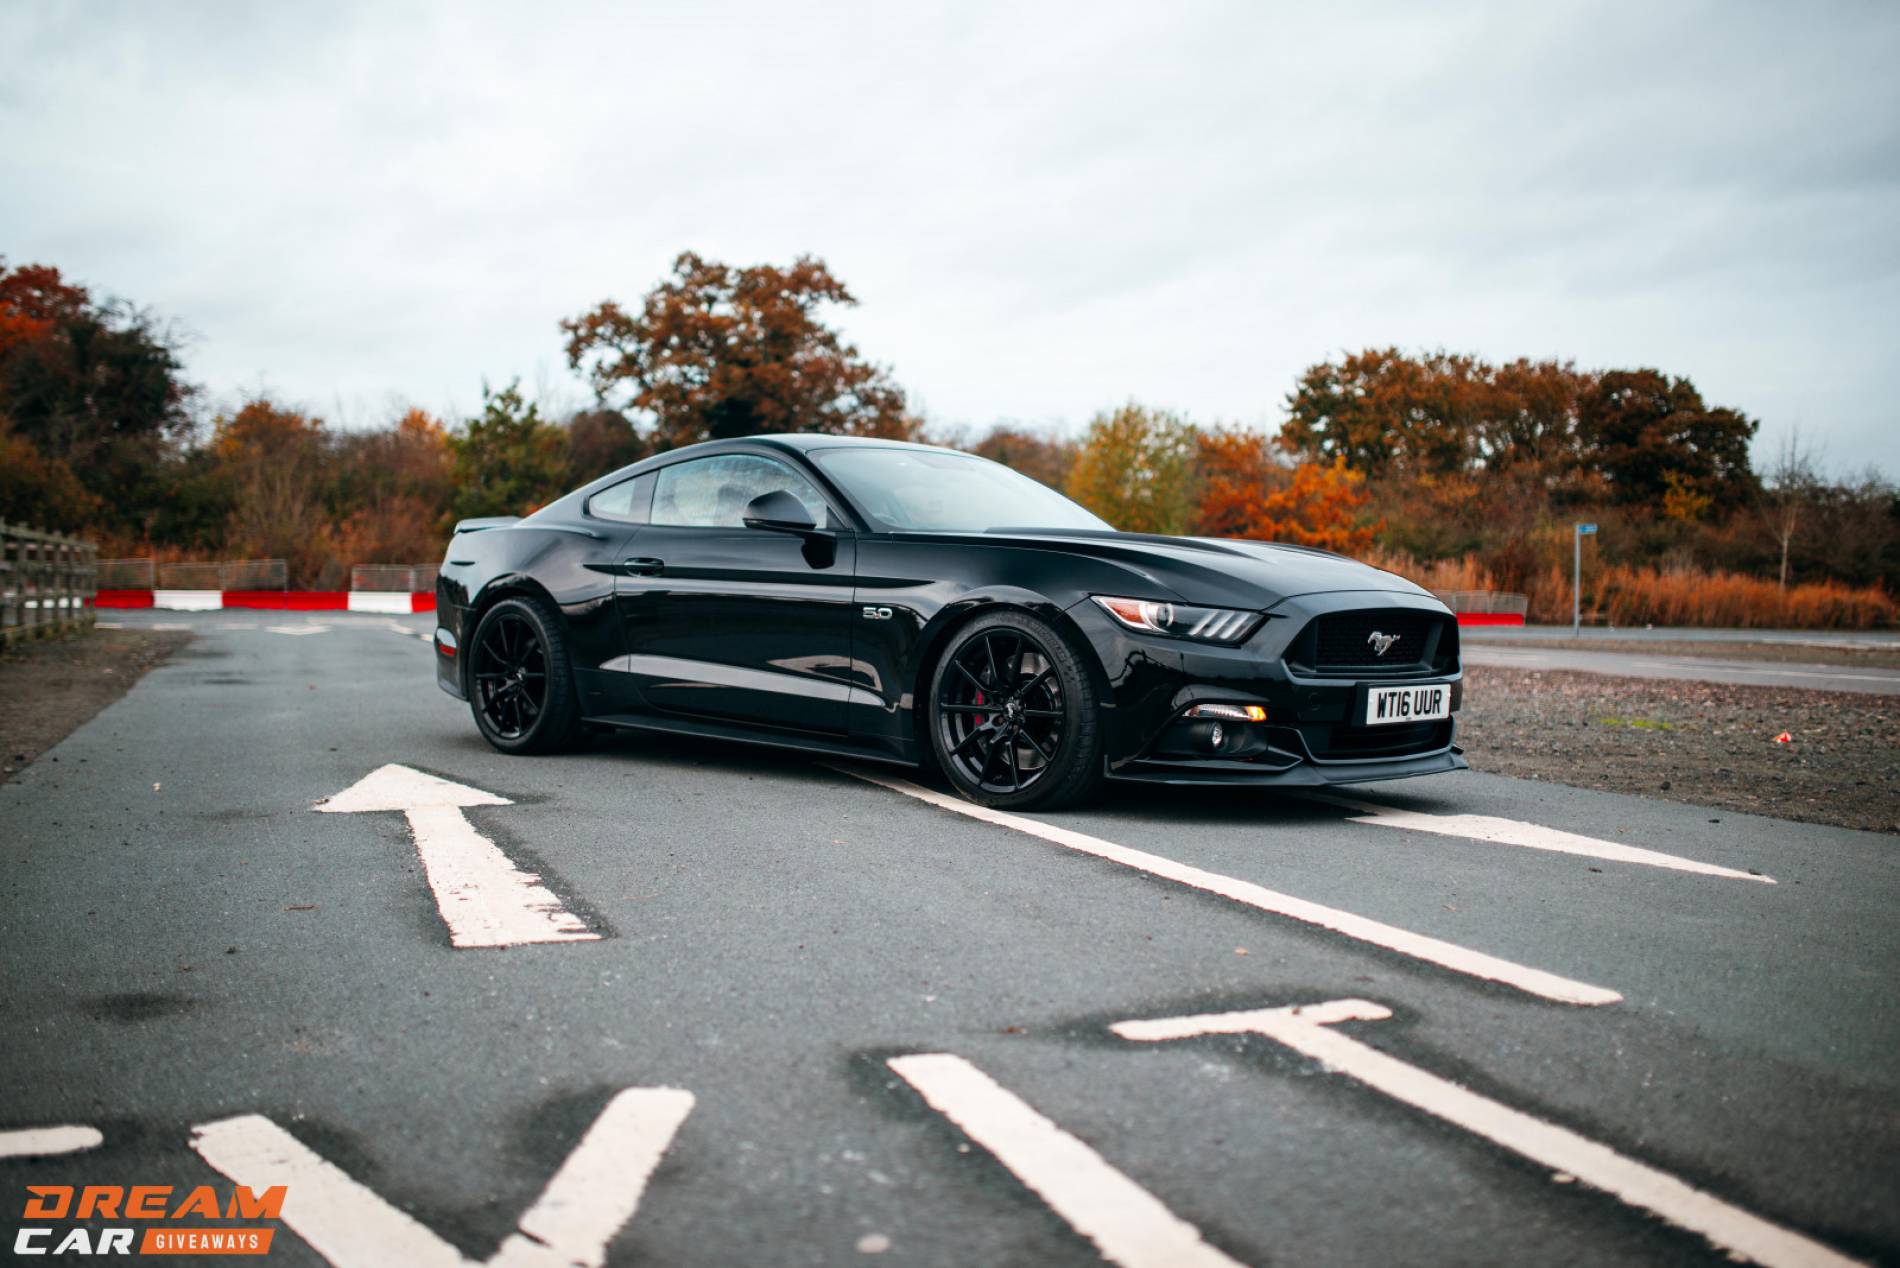 780BHP Ford Mustang & £2000 or £30,000 Tax Free